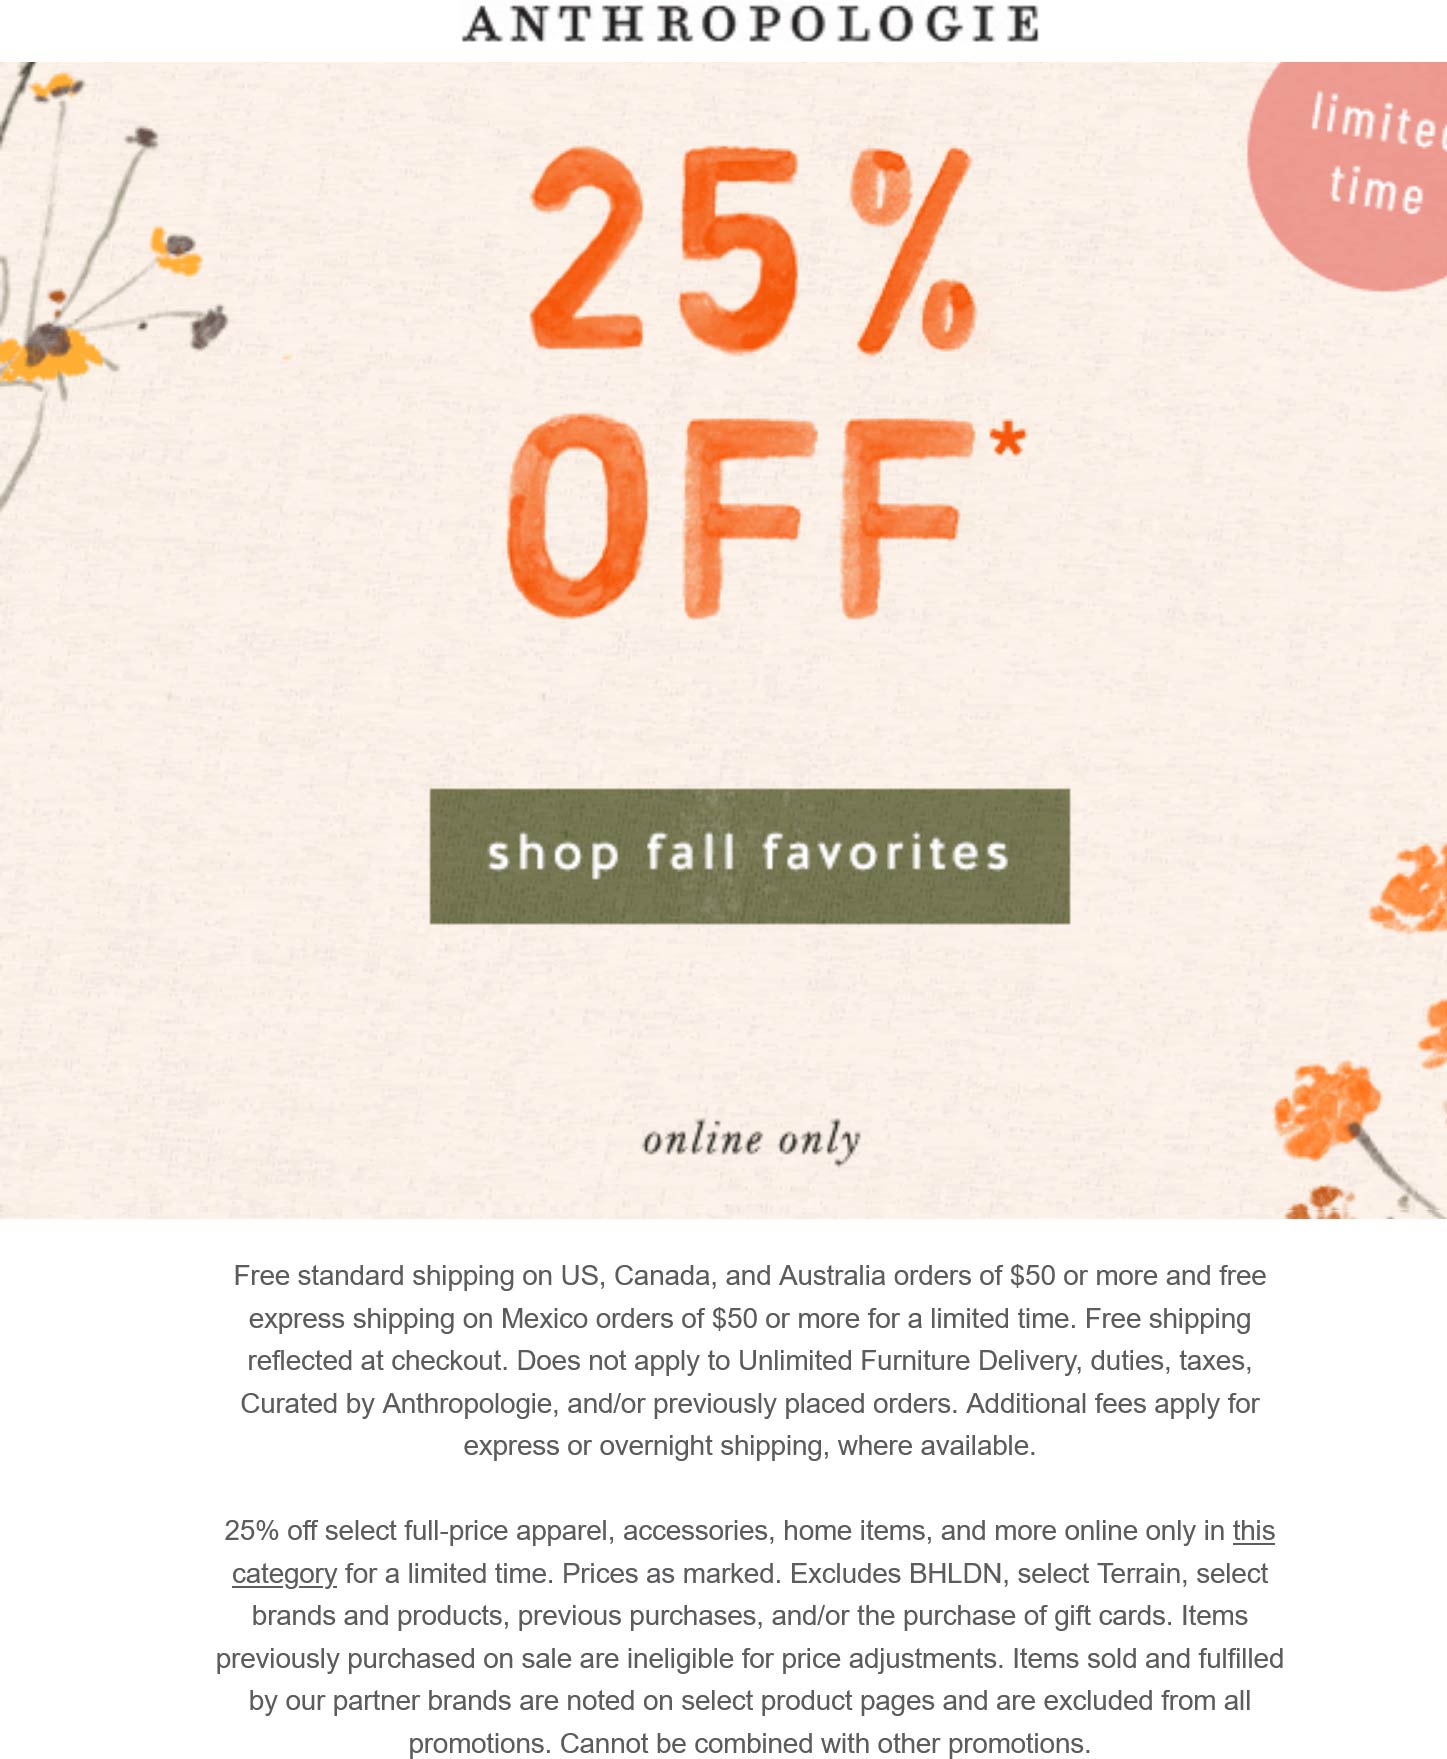 Anthropologie stores Coupon  25% off fall items online at Anthropologie #anthropologie 